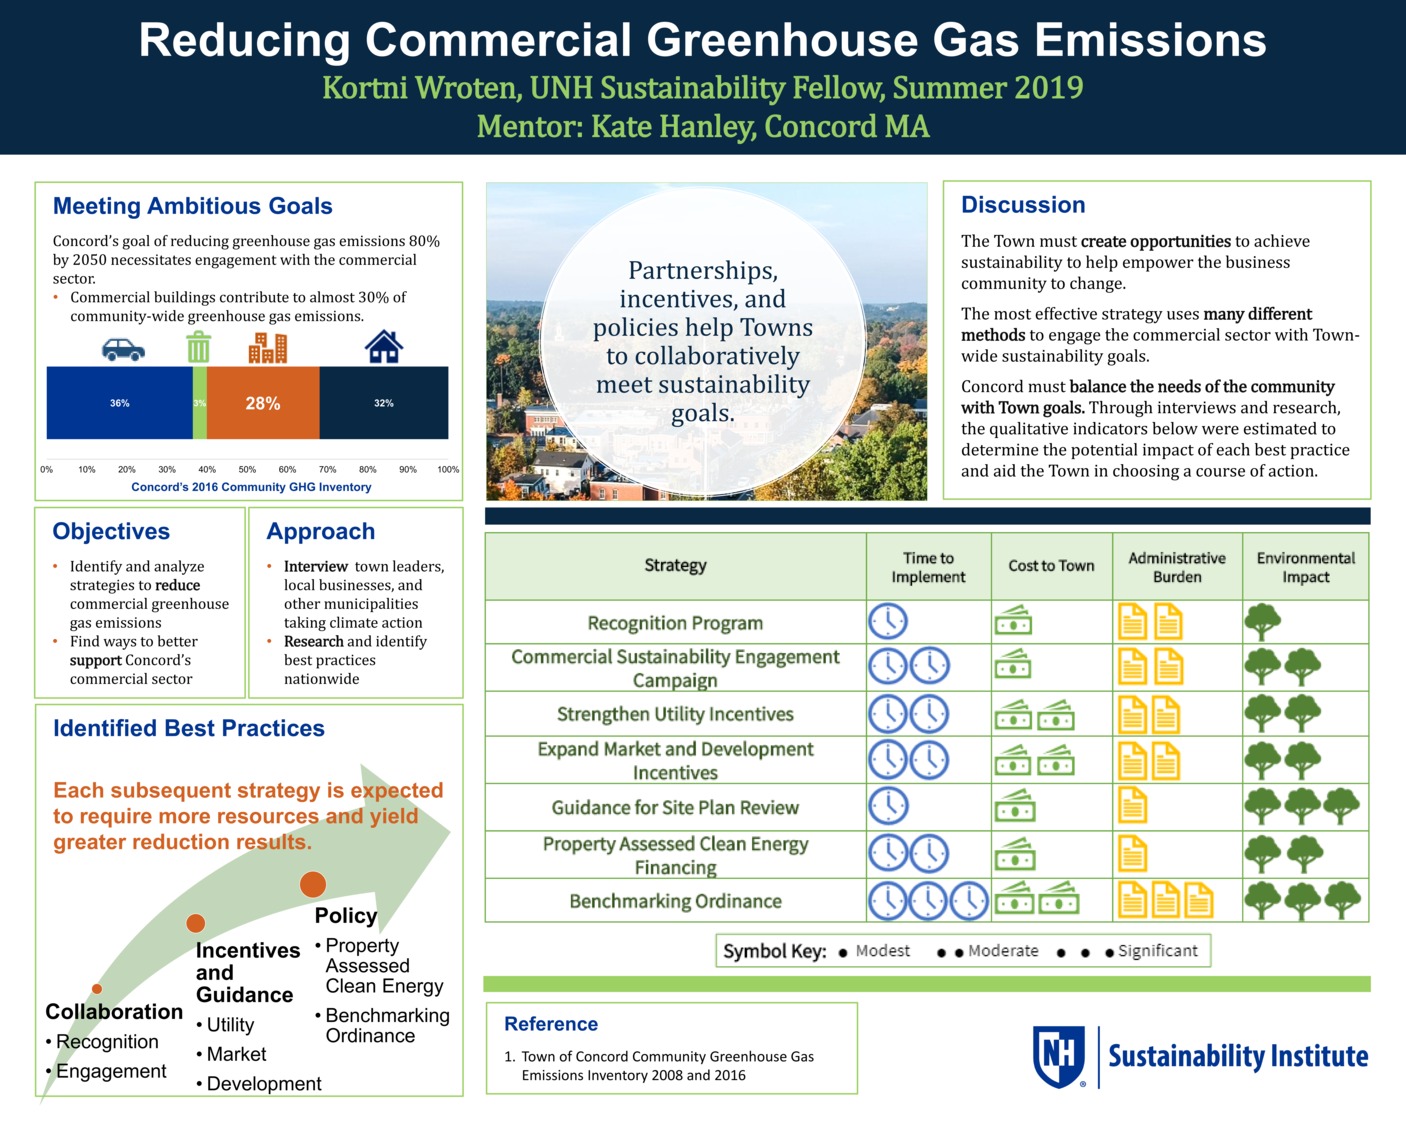 Reducing Commercial Ghgs In Concord, Ma by kwroten